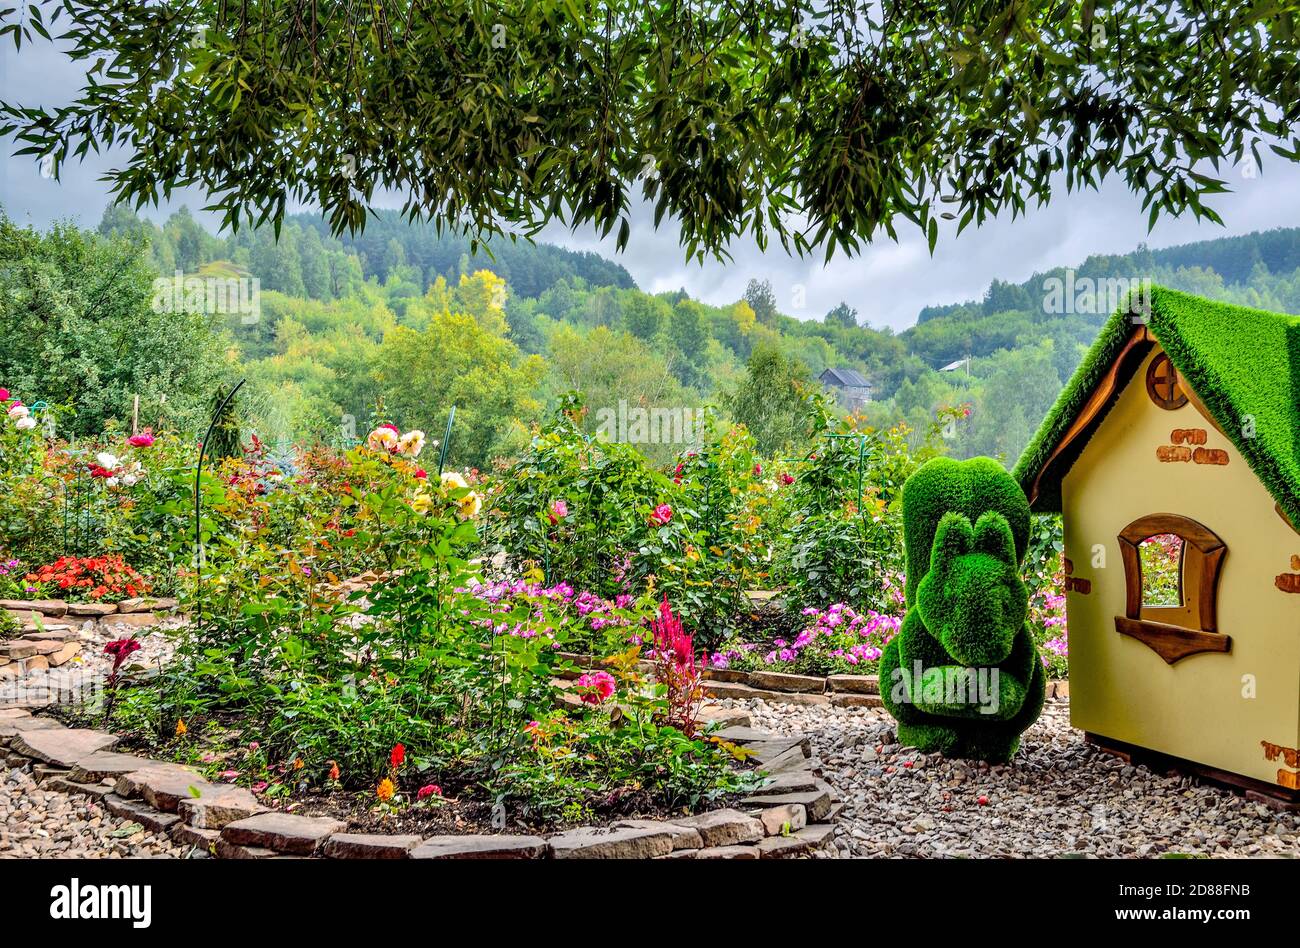 Novokuznetsk, Russia - August 15, 2020: Green sculpture of squirrel near little house, created from artificial grass - gardens topiary. Rose garden - Stock Photo